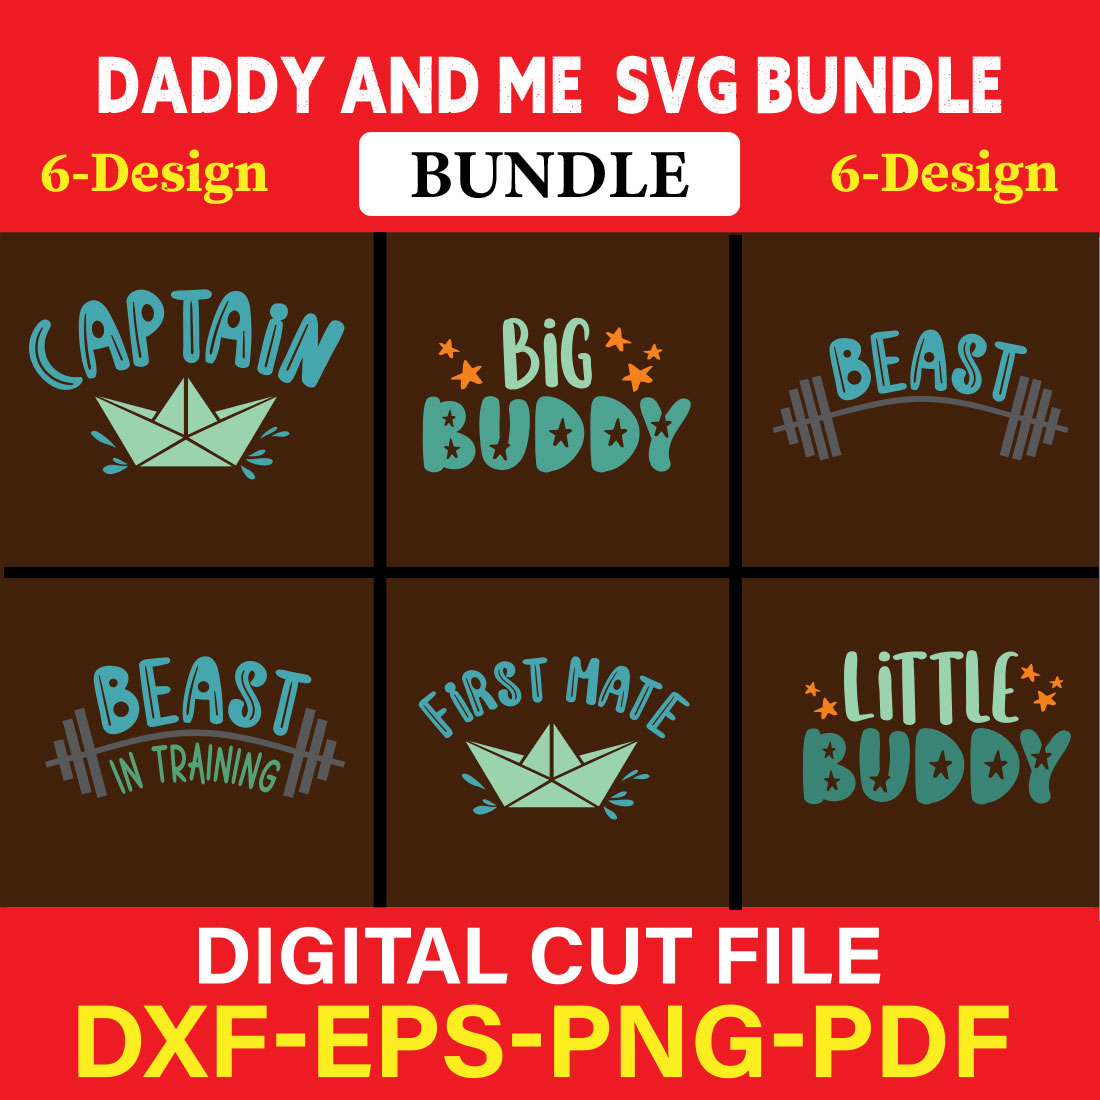 Daddy And Me T-shirt Design Bundle Vol-5 cover image.